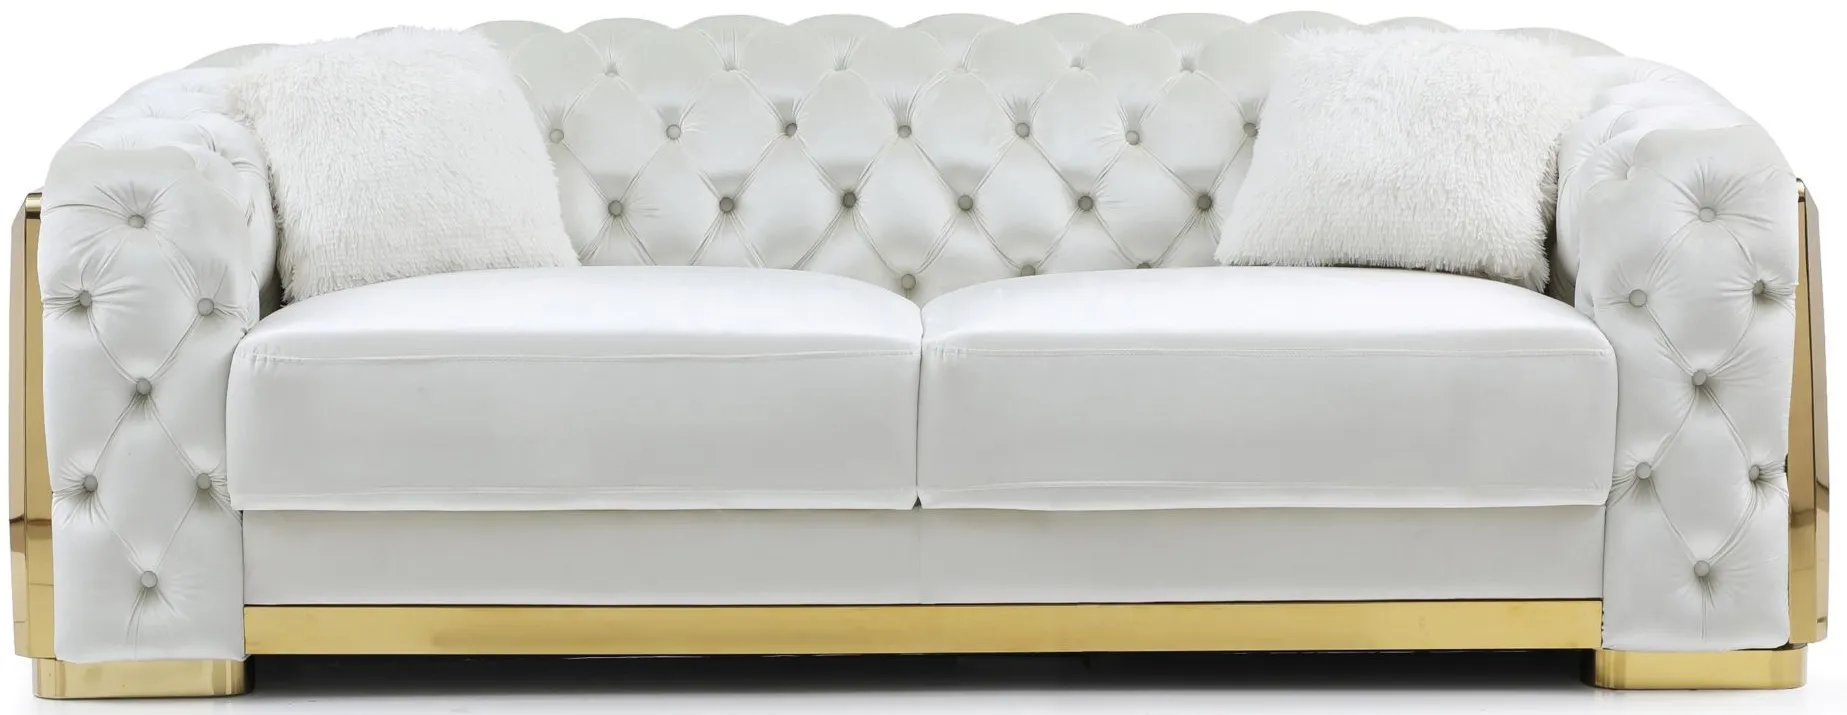 Lexi Sofa in Ivory by Glory Furniture